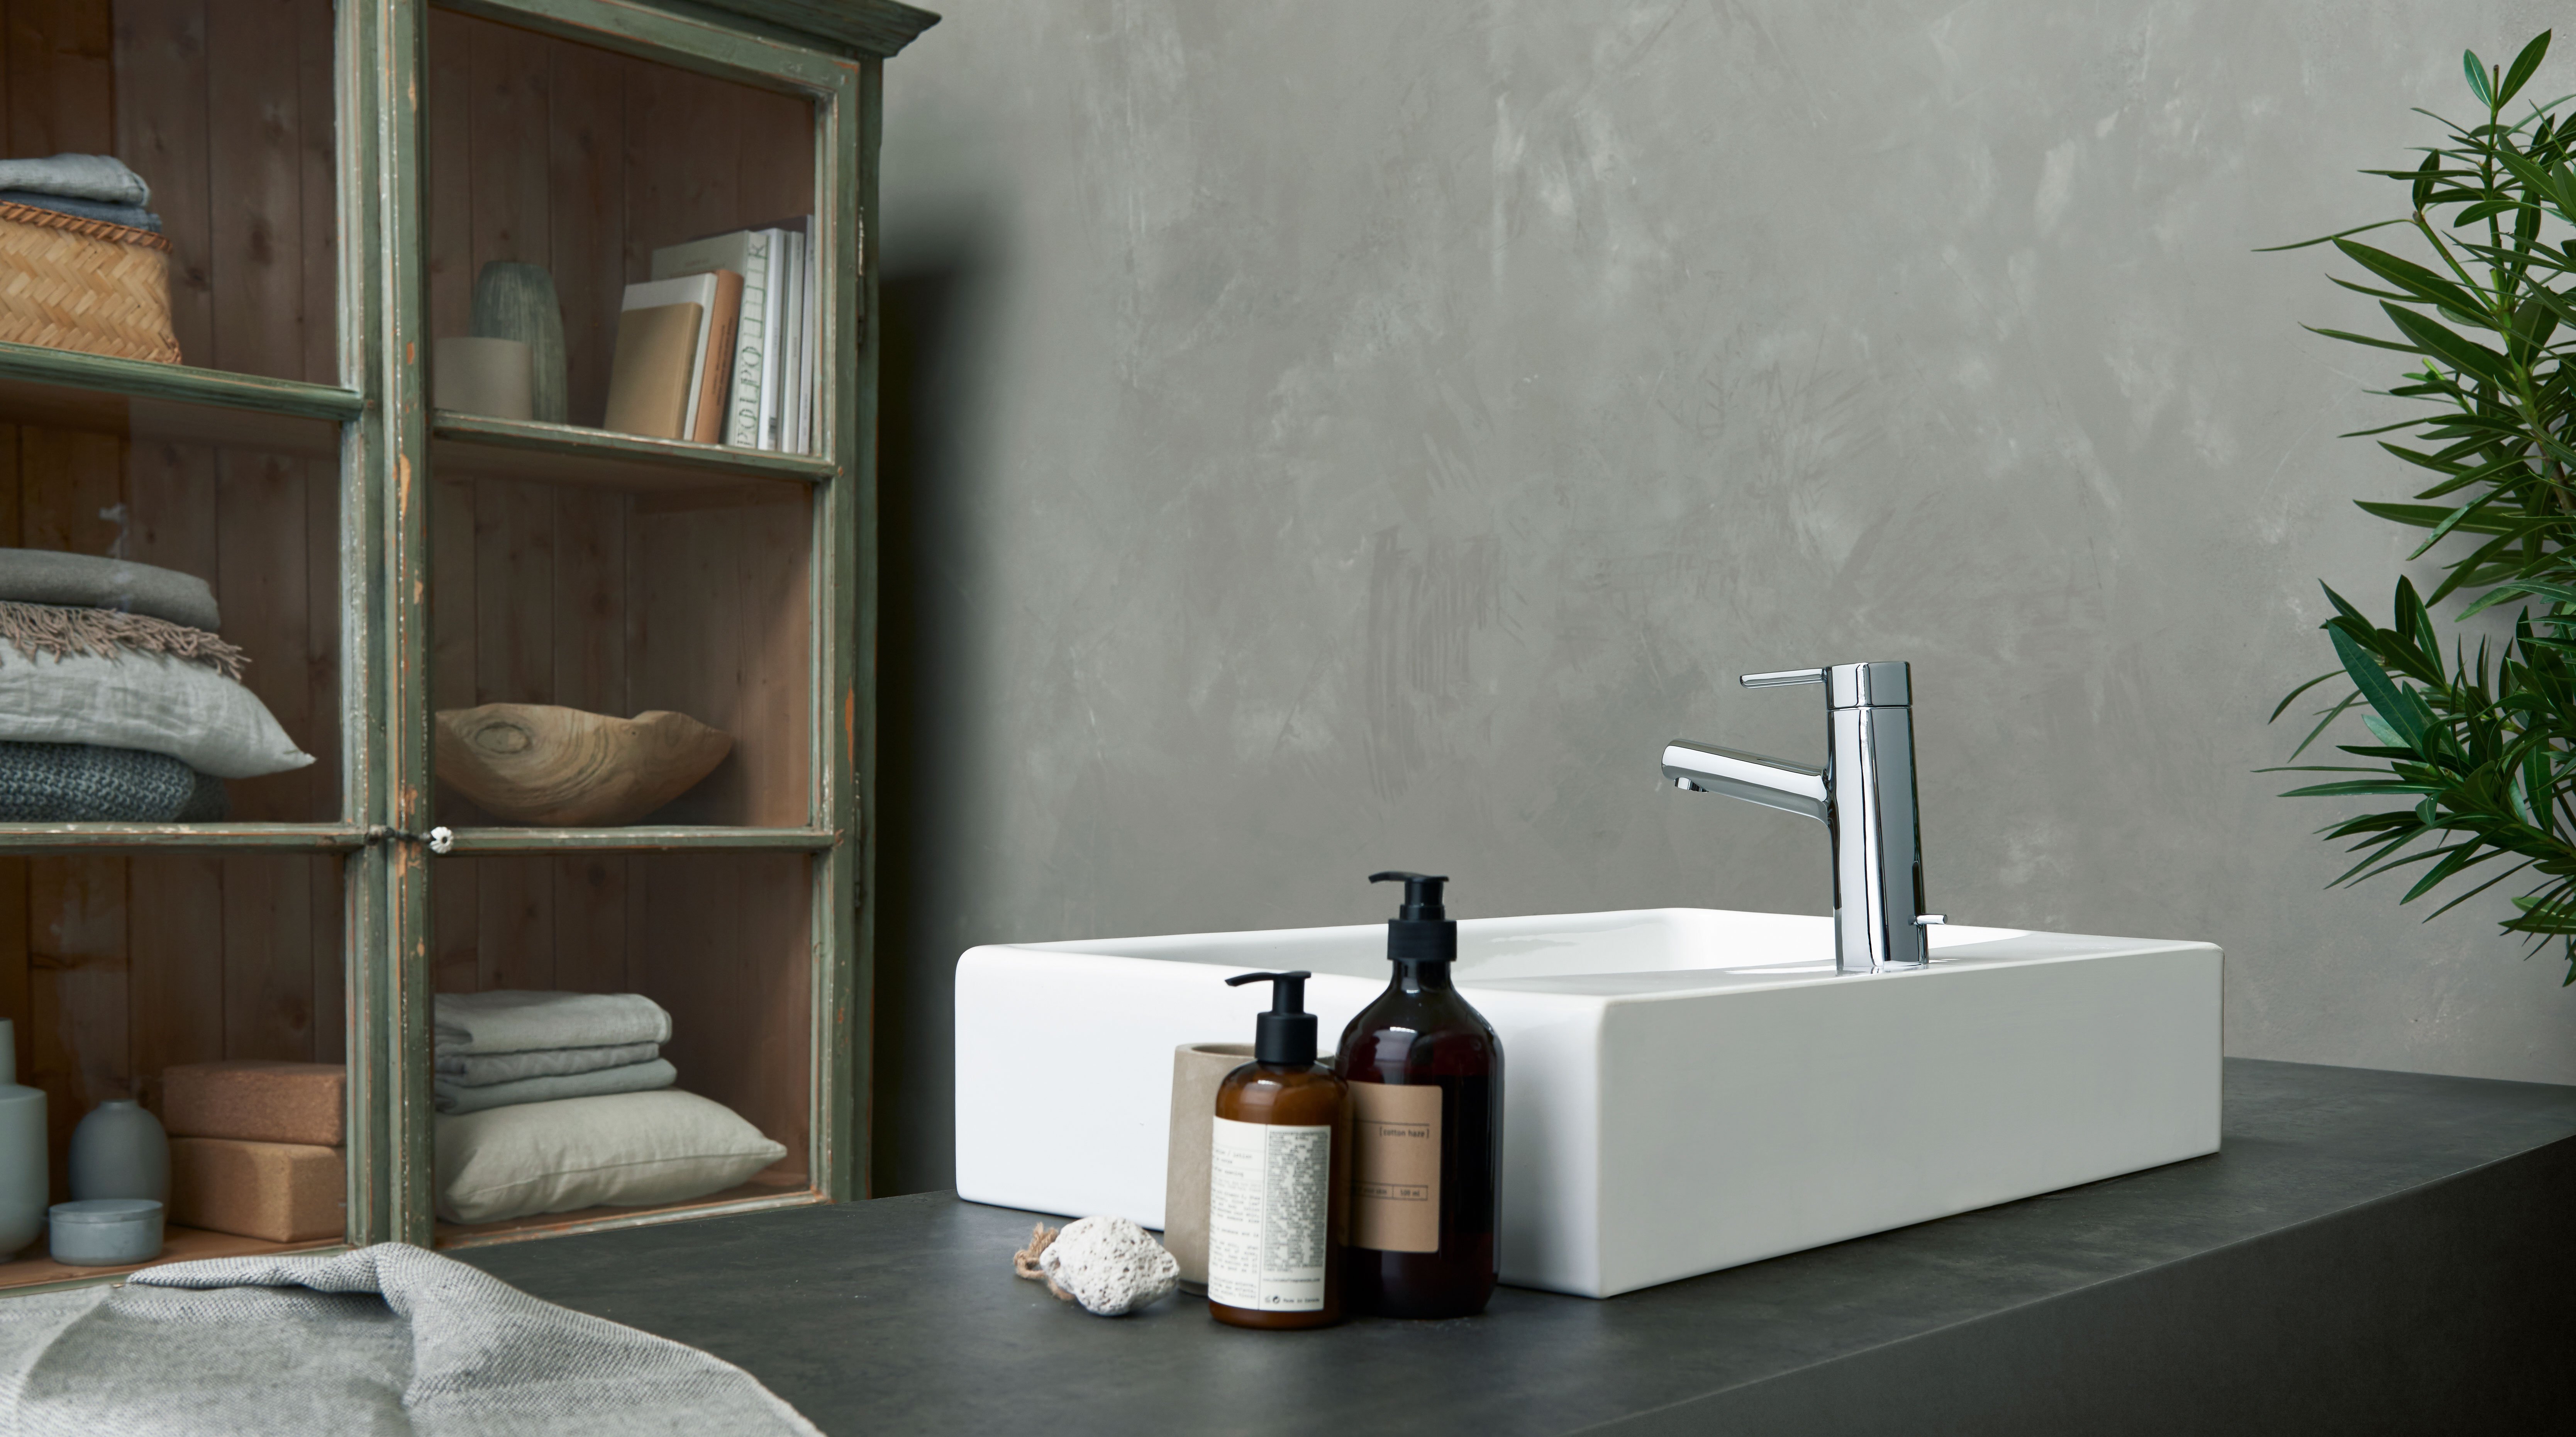 Oras Inspera top-operated faucet brings a timeless feeling to the bathroom.